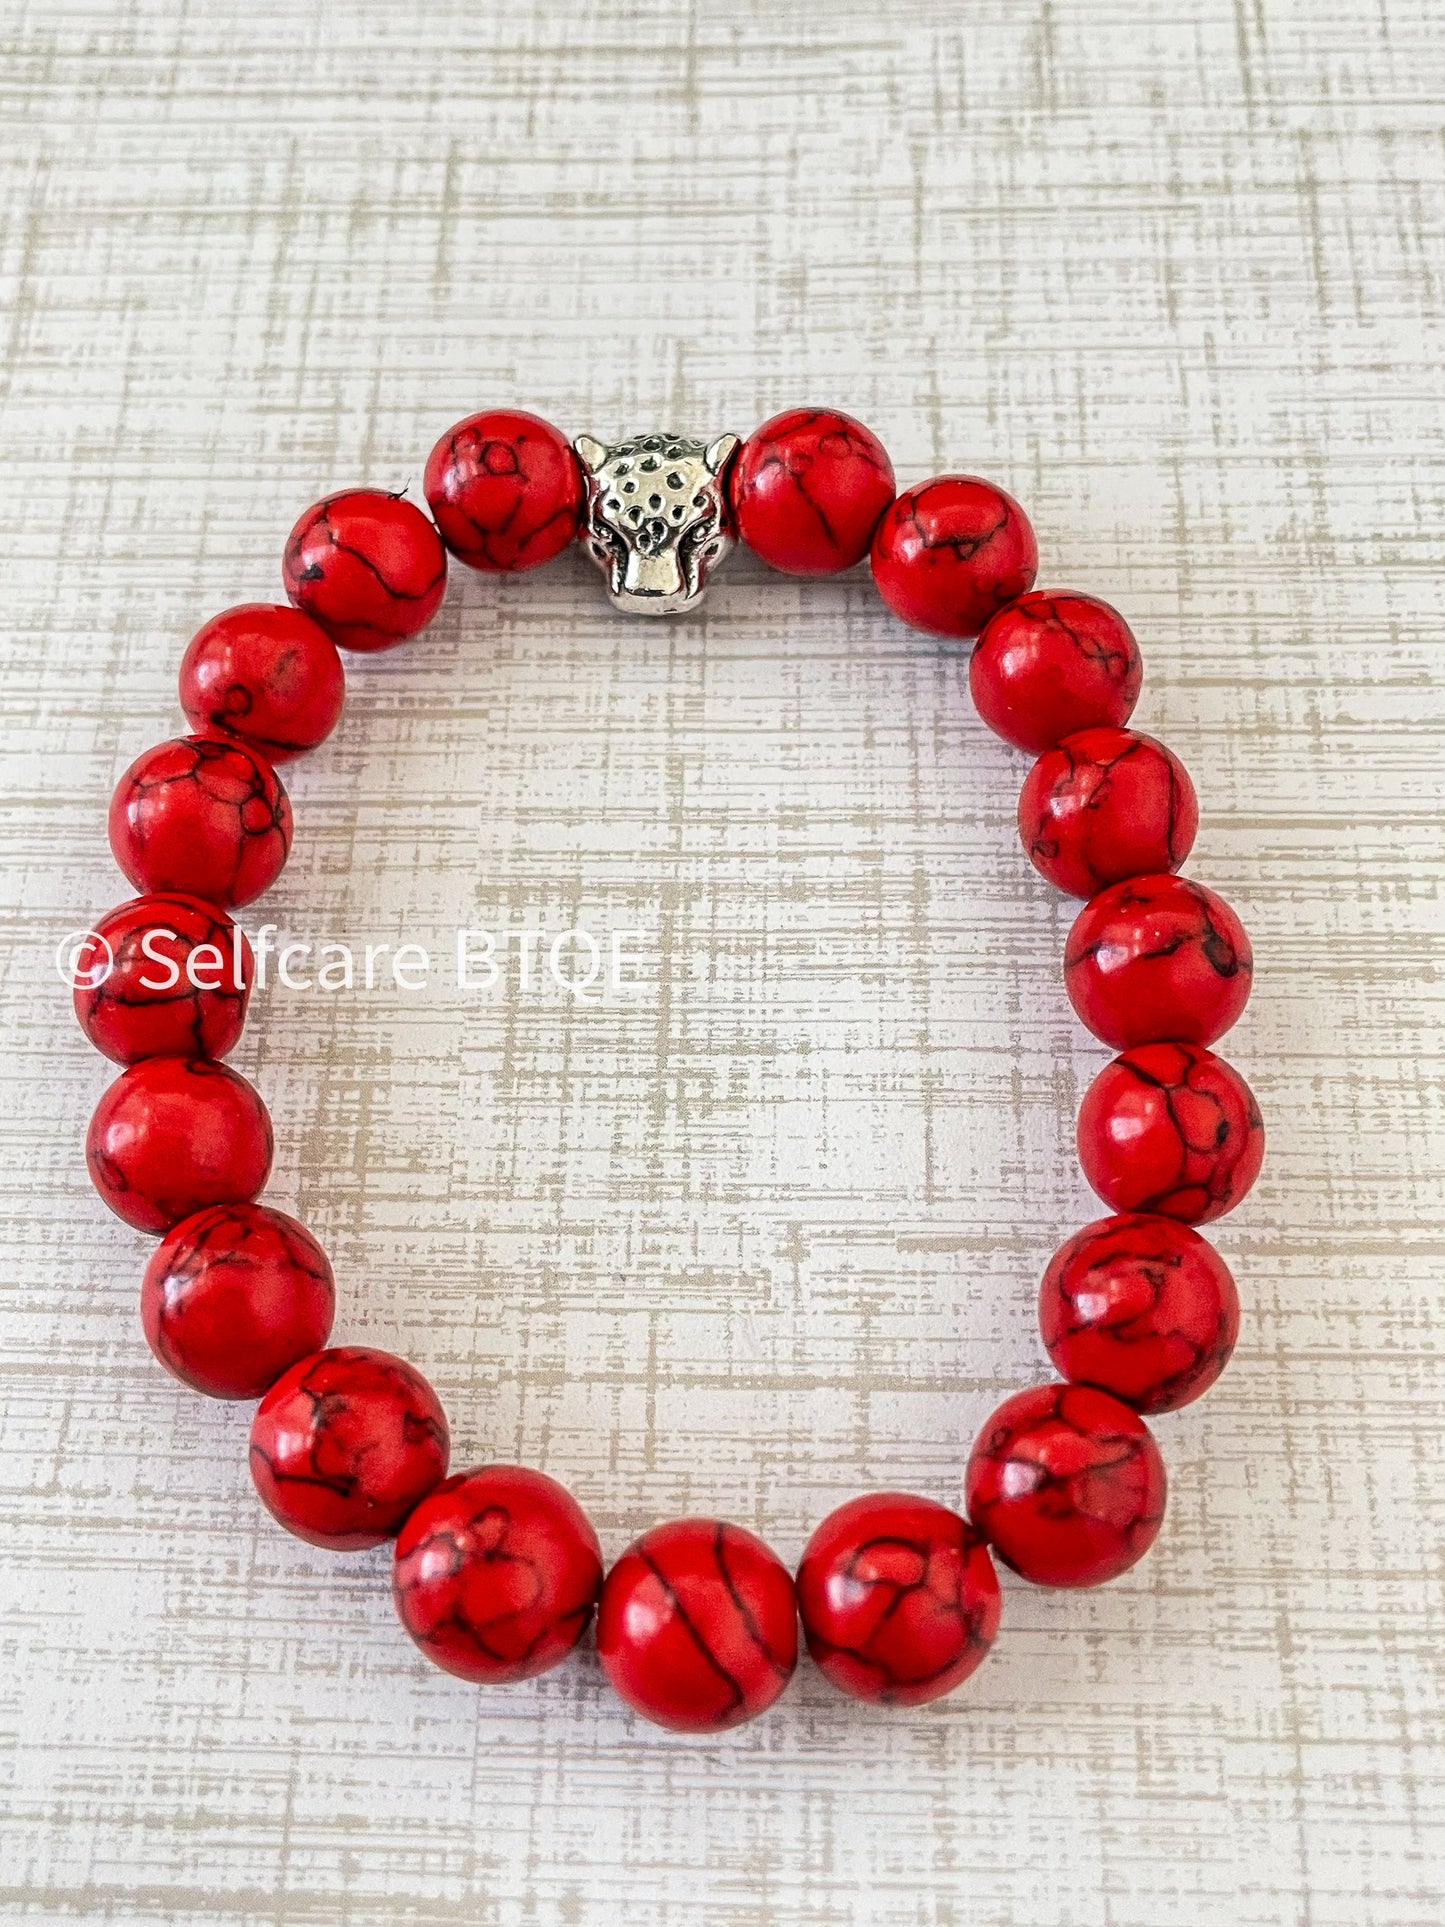 Leopard Head Charm Bracelet with Red Turquoise Stones